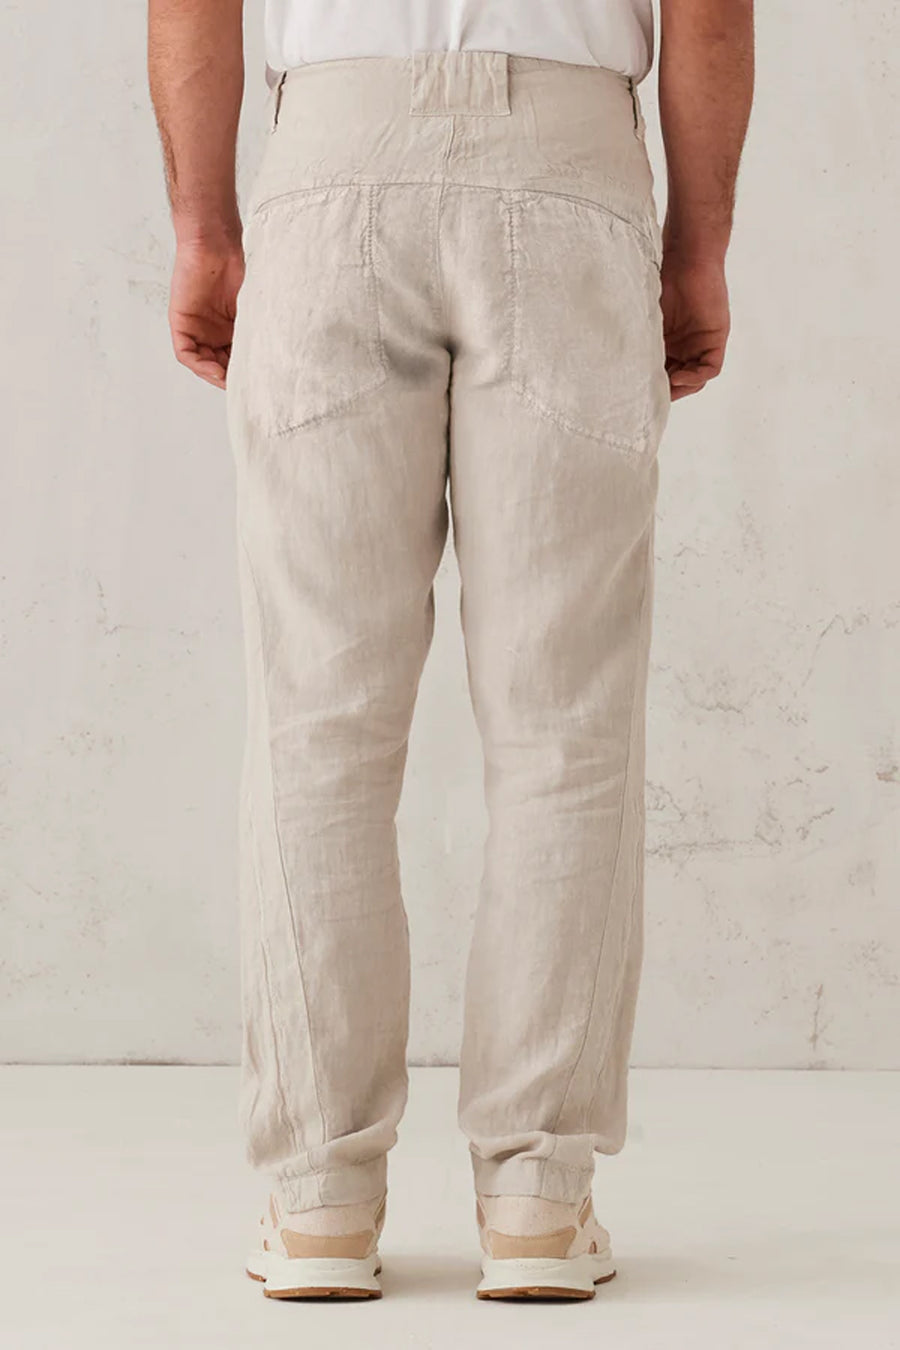 Buy the Transit Regular Fit Linen Trousers in Ice at Intro. Spend £50 for free UK delivery. Official stockists. We ship worldwide.